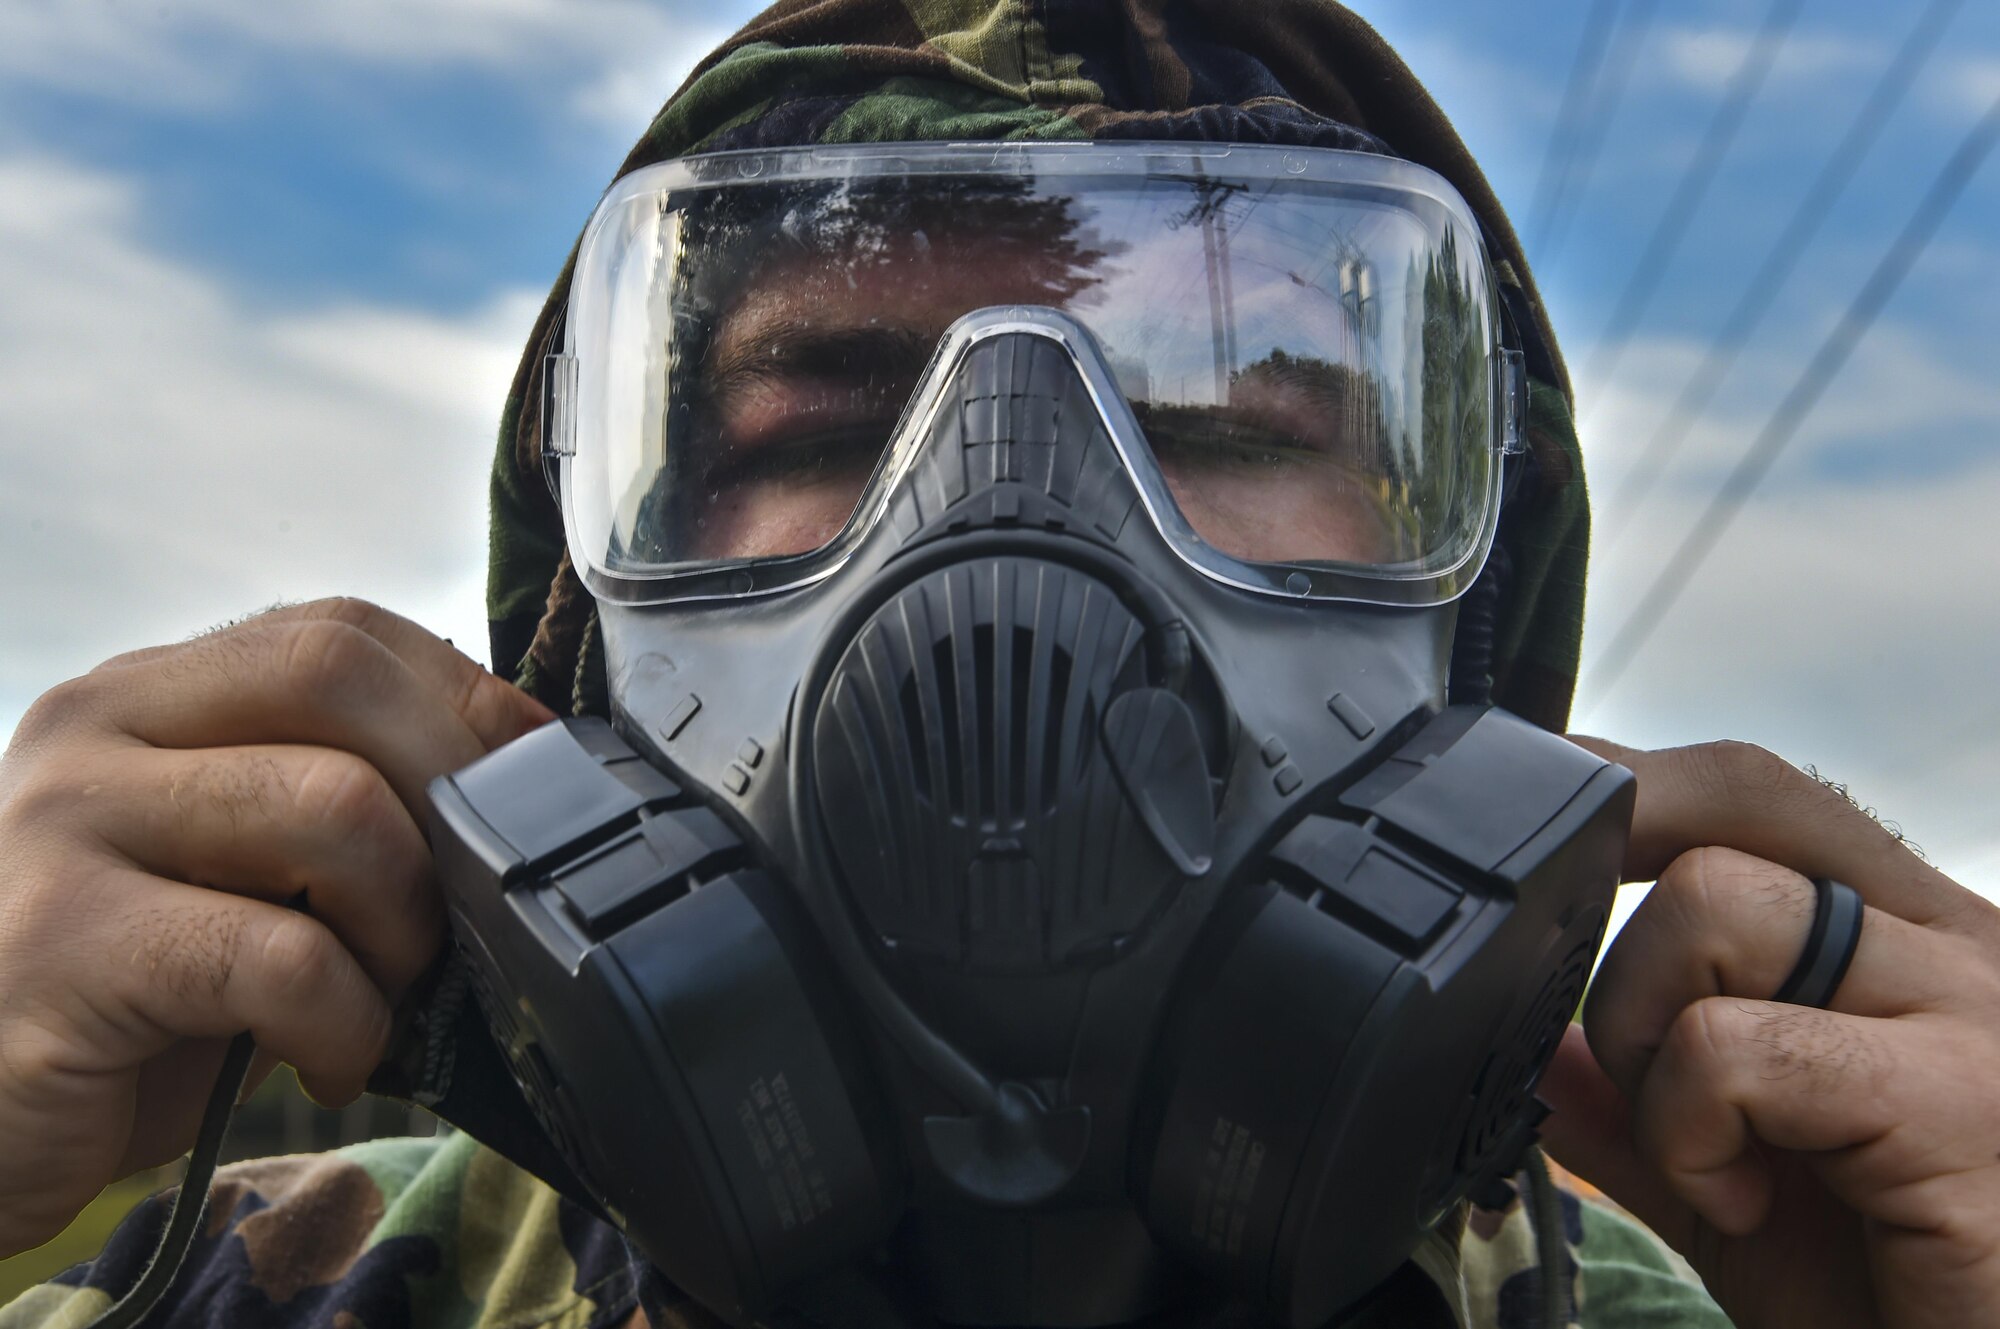 Senior Airman Dylan Babb, 628th Civil Engineer Squadron explosive ordnance disposal technician, dons a gas mask during training, June 28, 2017. EOD here trained over the course of a week to ensure they are retaining knowledge and can efficiently use their skillsets in real world situations. 